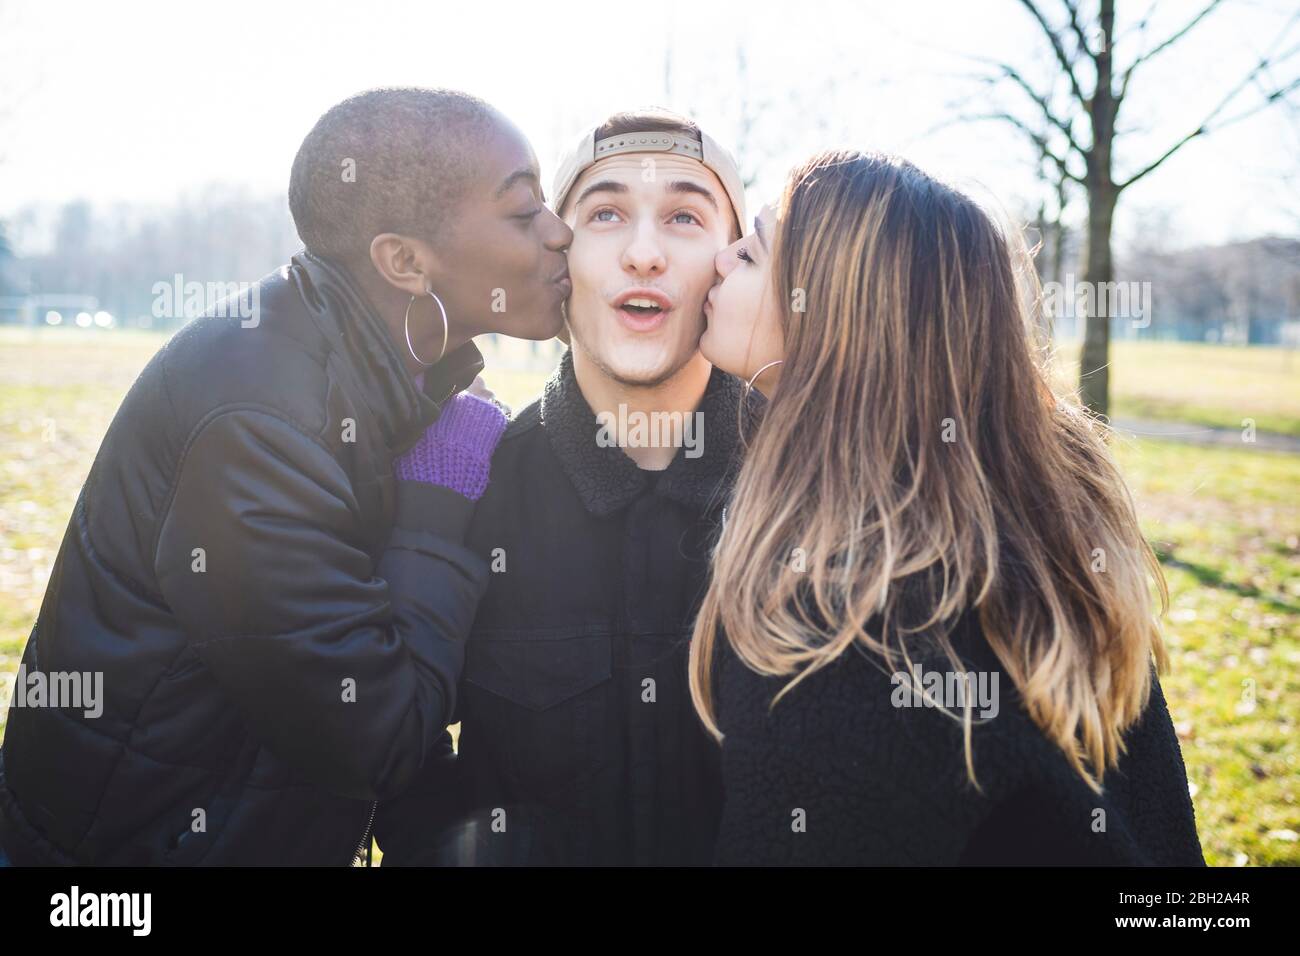 Two girls kissing their friend on his cheaks Stock Photo